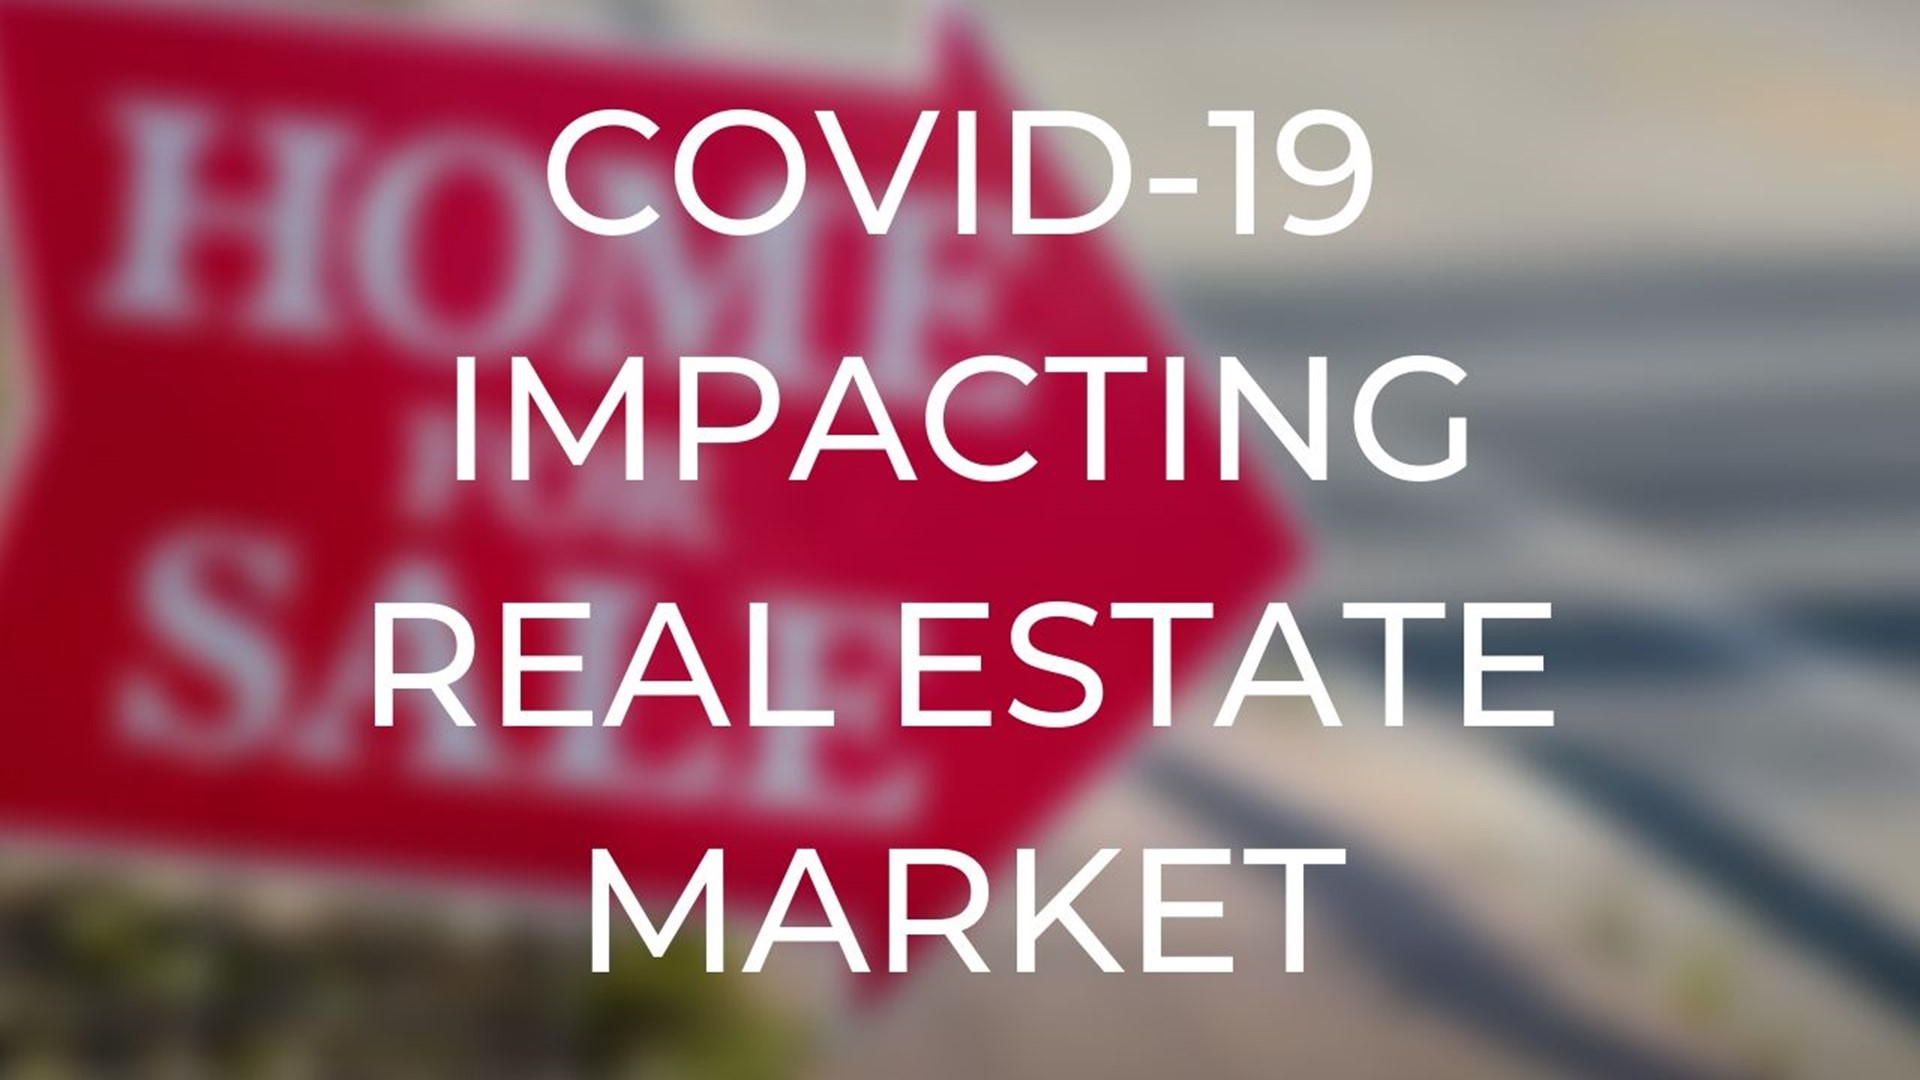 Here’s how the coronavirus pandemic is impacting the real estate market.